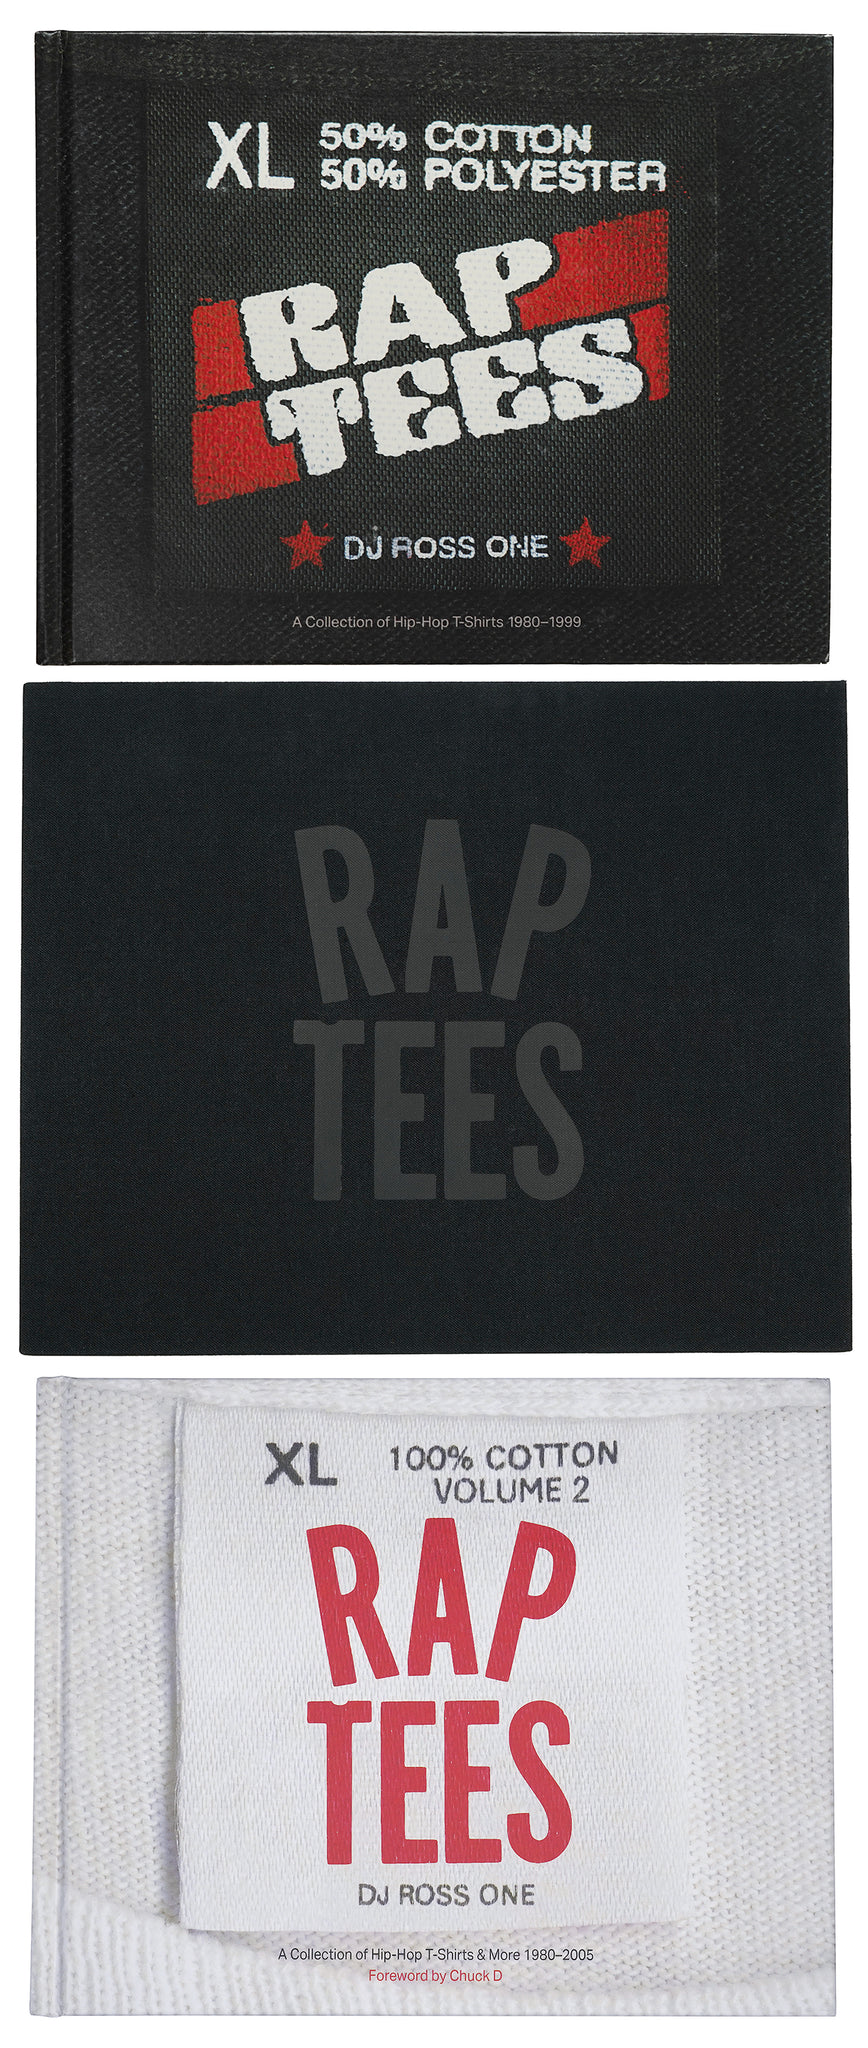 Material Gain: The Lost History of Rap Tees